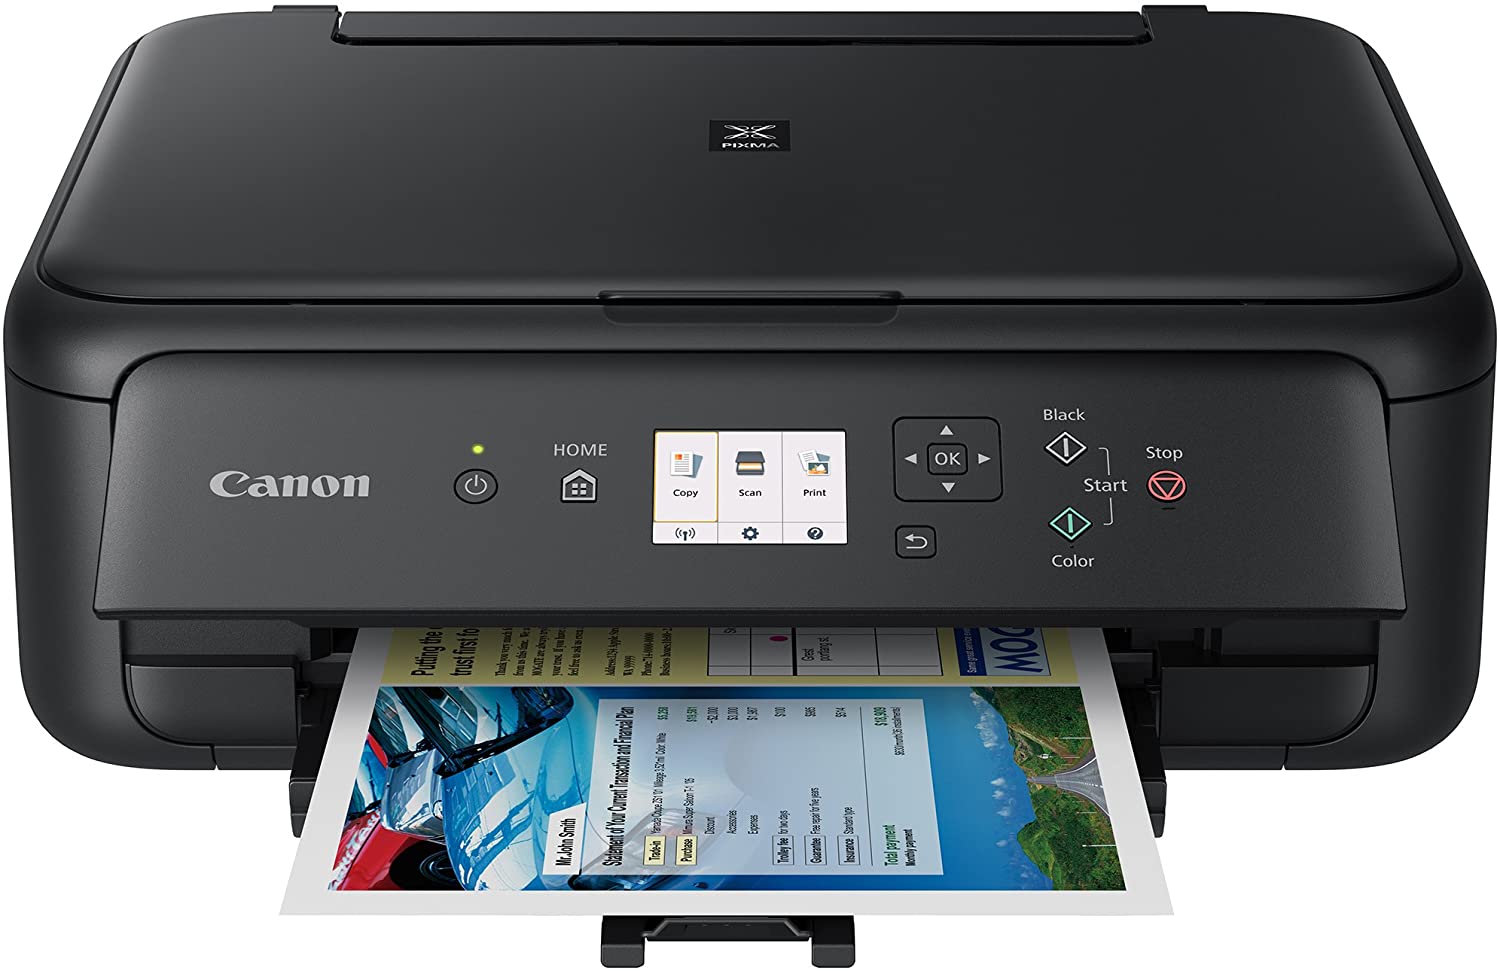 Canon PIXMA TS5120 Wireless All-In-One Mobile and Tablet Printing Printer with Scanner and Copier, Black - image 1 of 3